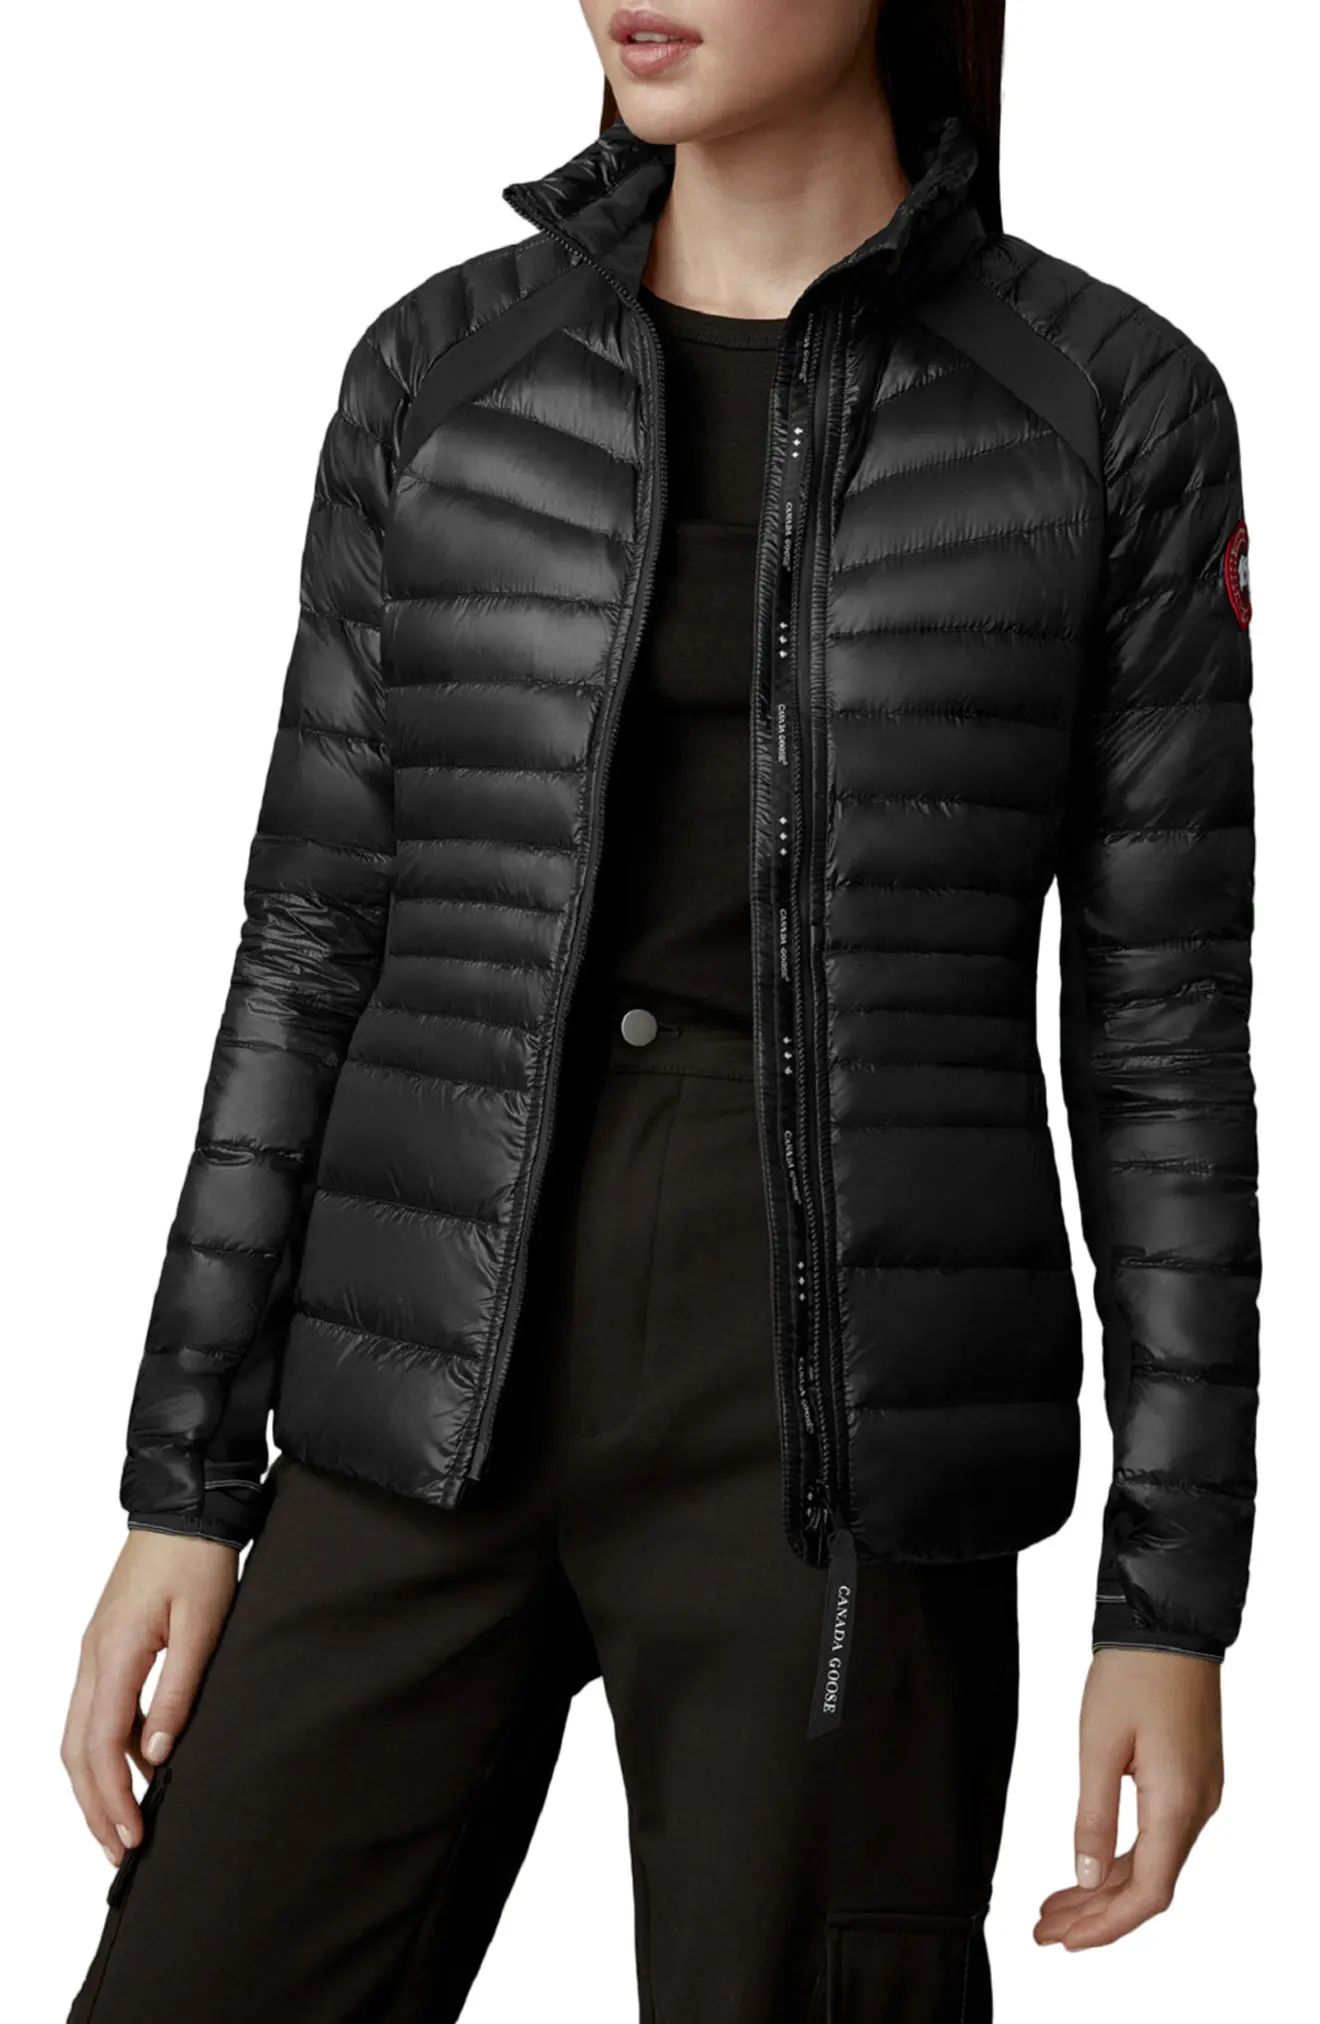 Canada Goose Hybridge Lite Water Repellent 800 Fill Power Down Jacket in Black at Nordstrom, Size Sm | Nordstrom